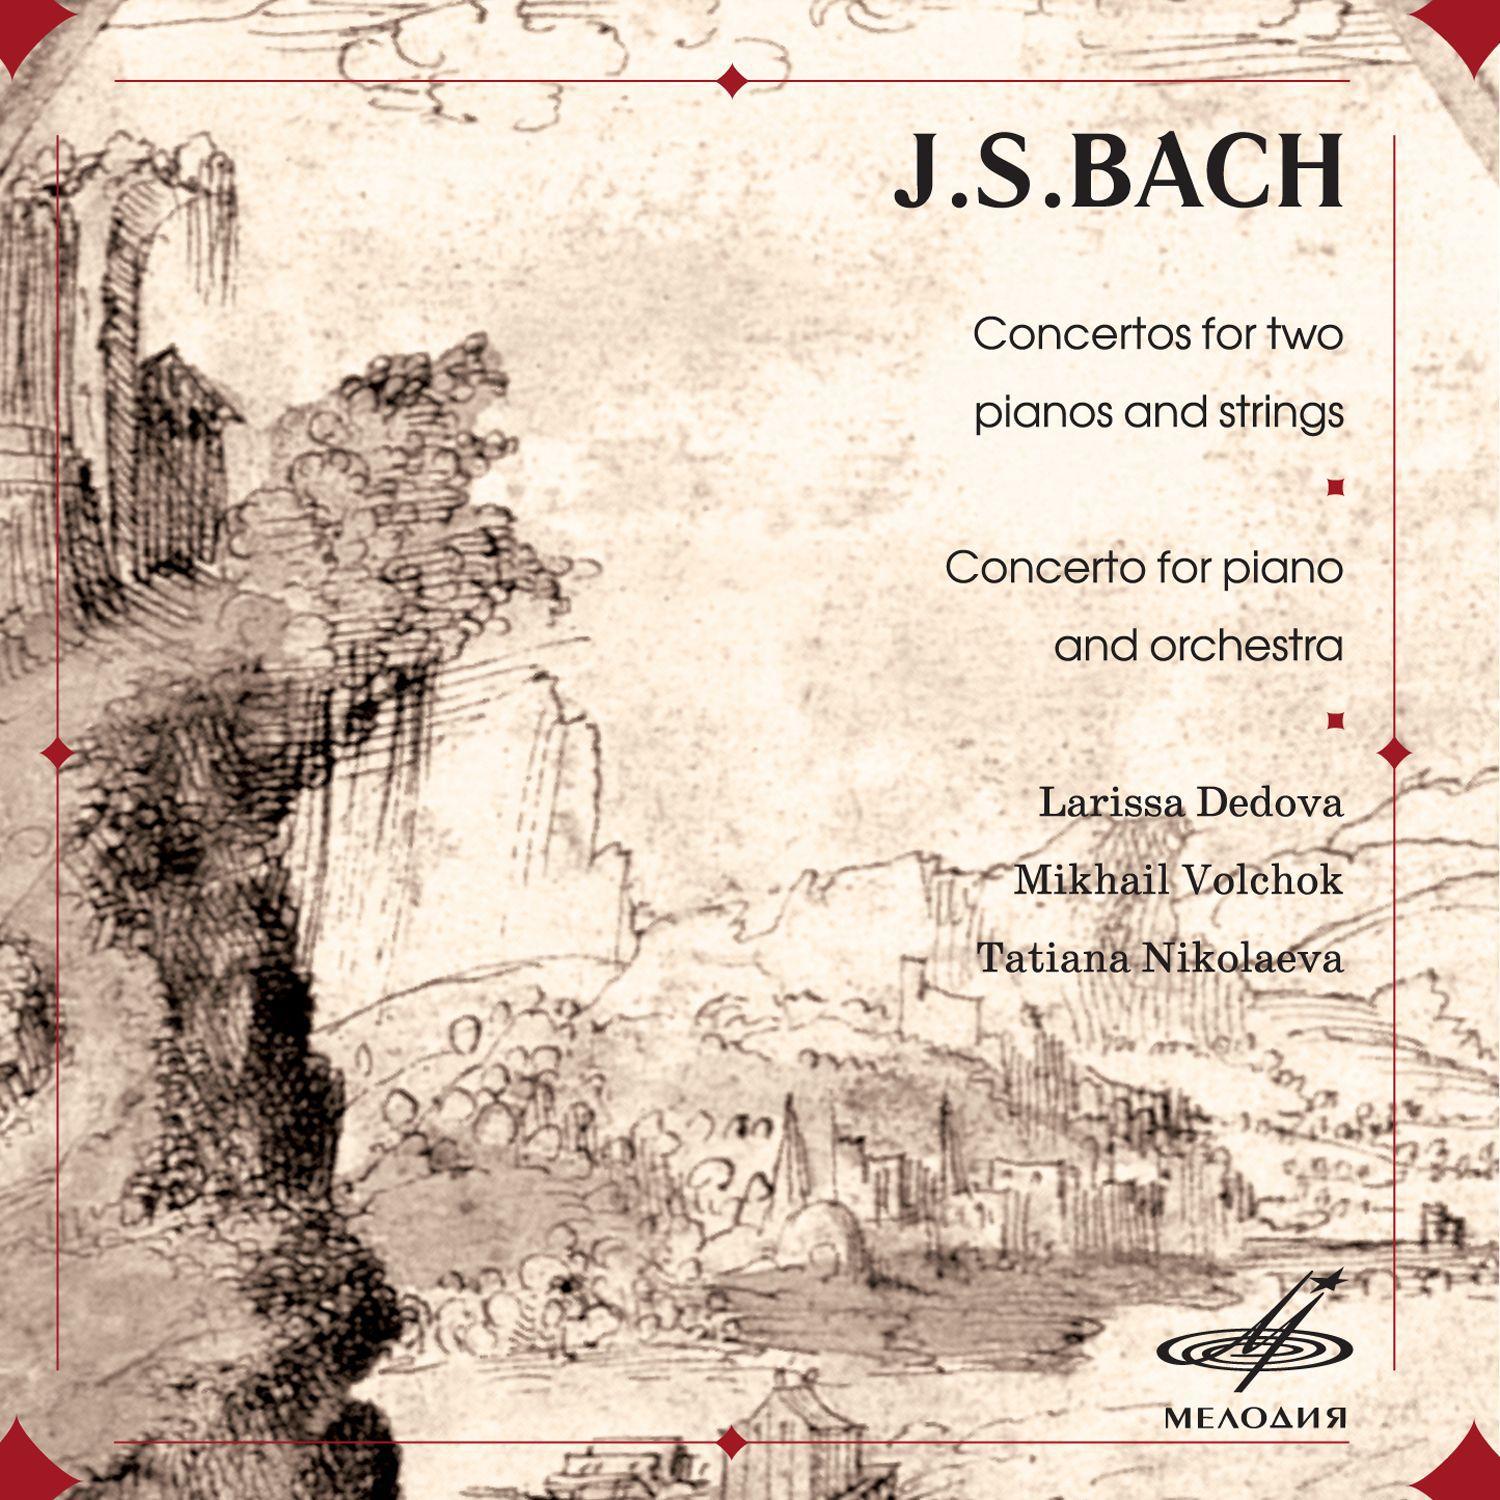 Bach: Concertos for Two Pianos and Strings & Concerto for Piano and Orchestra